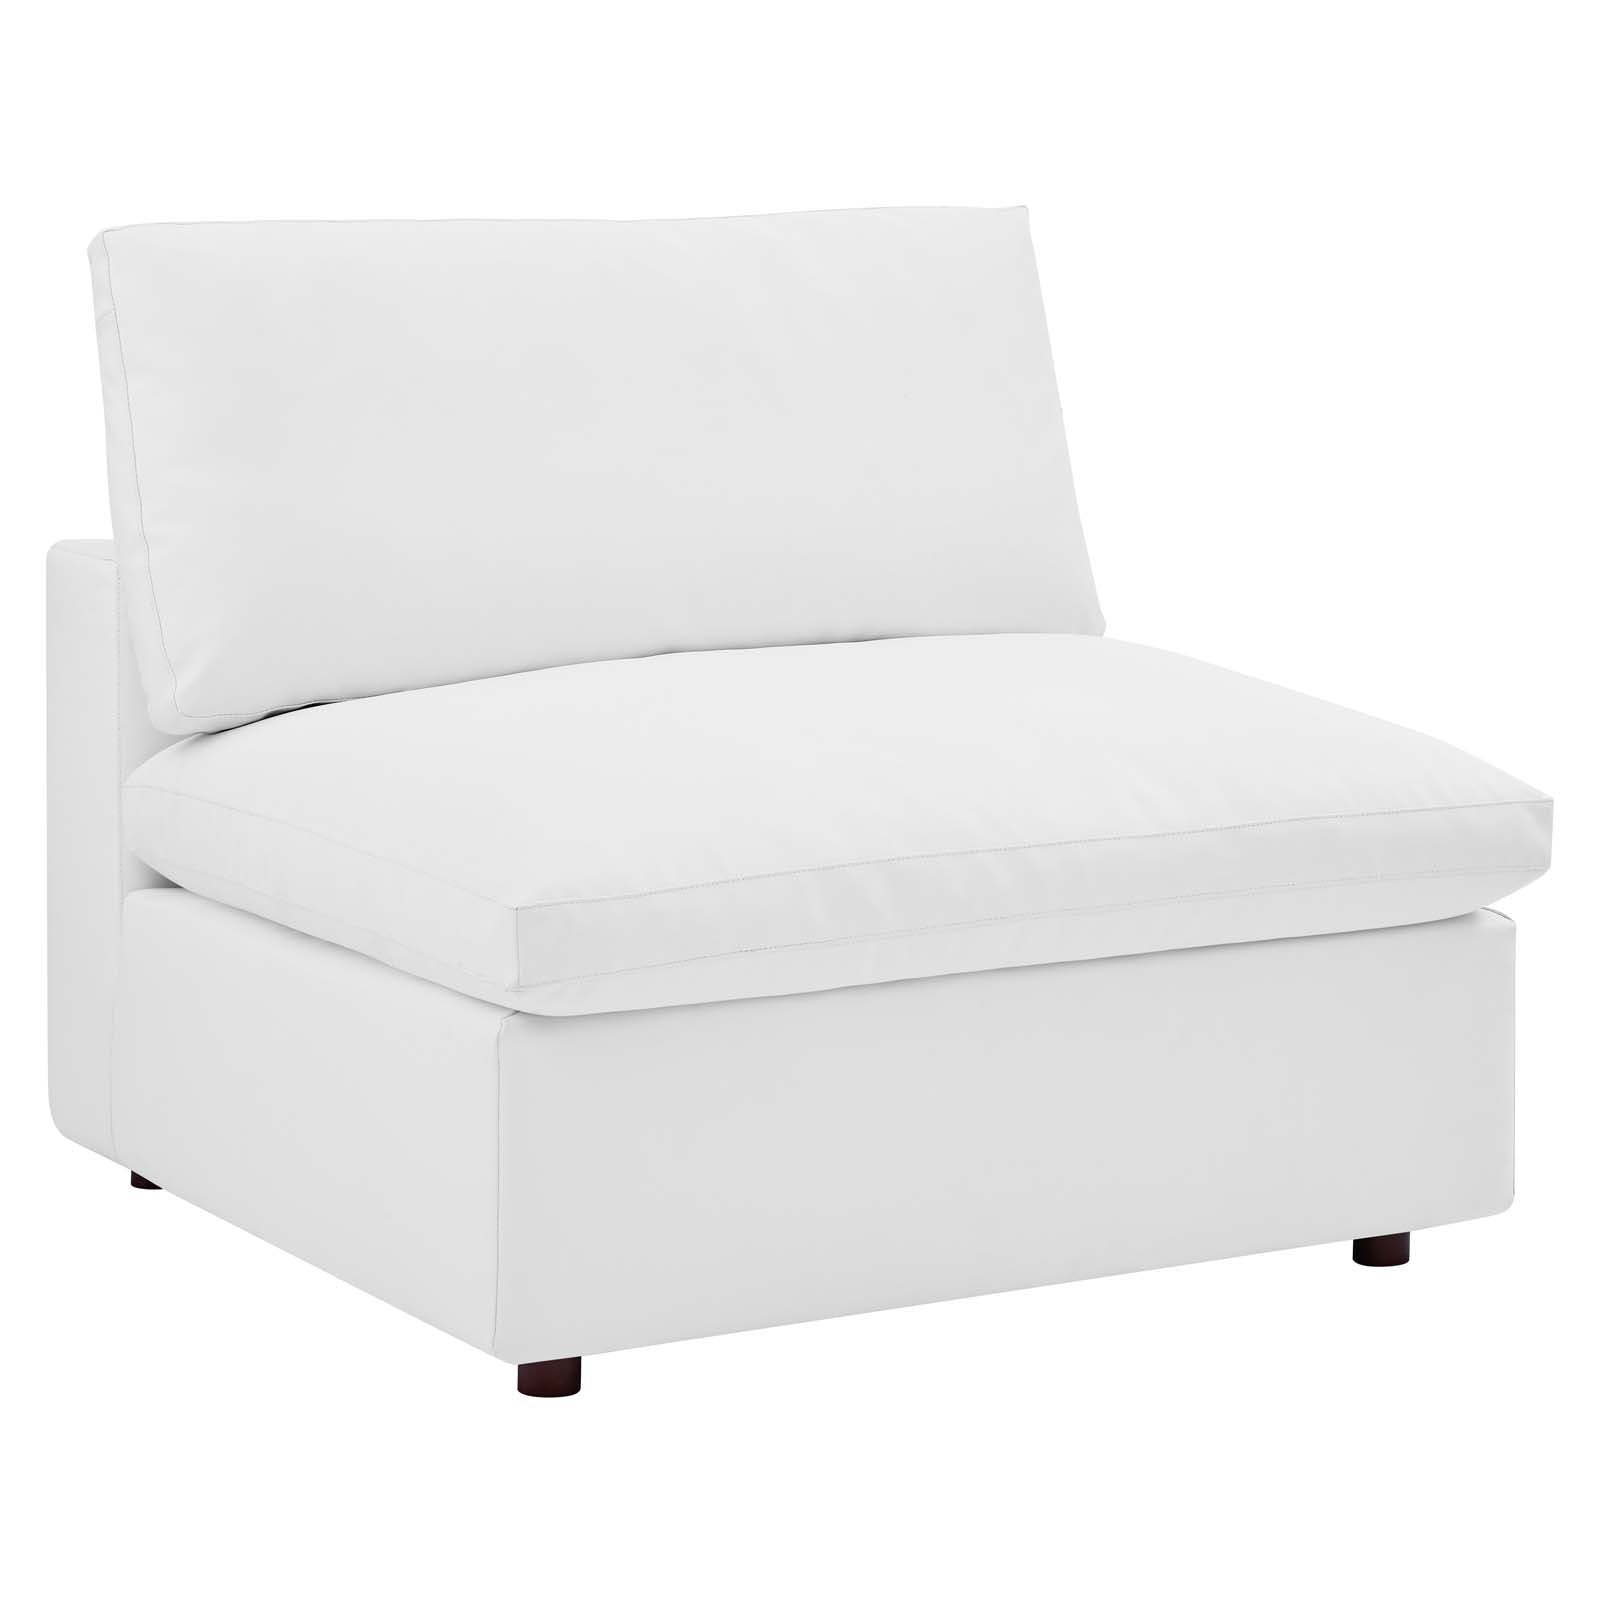 Modway Sectional Sofas - Commix Down Filled Overstuffed Vegan Leather 7 Piece Sectional Sofa White